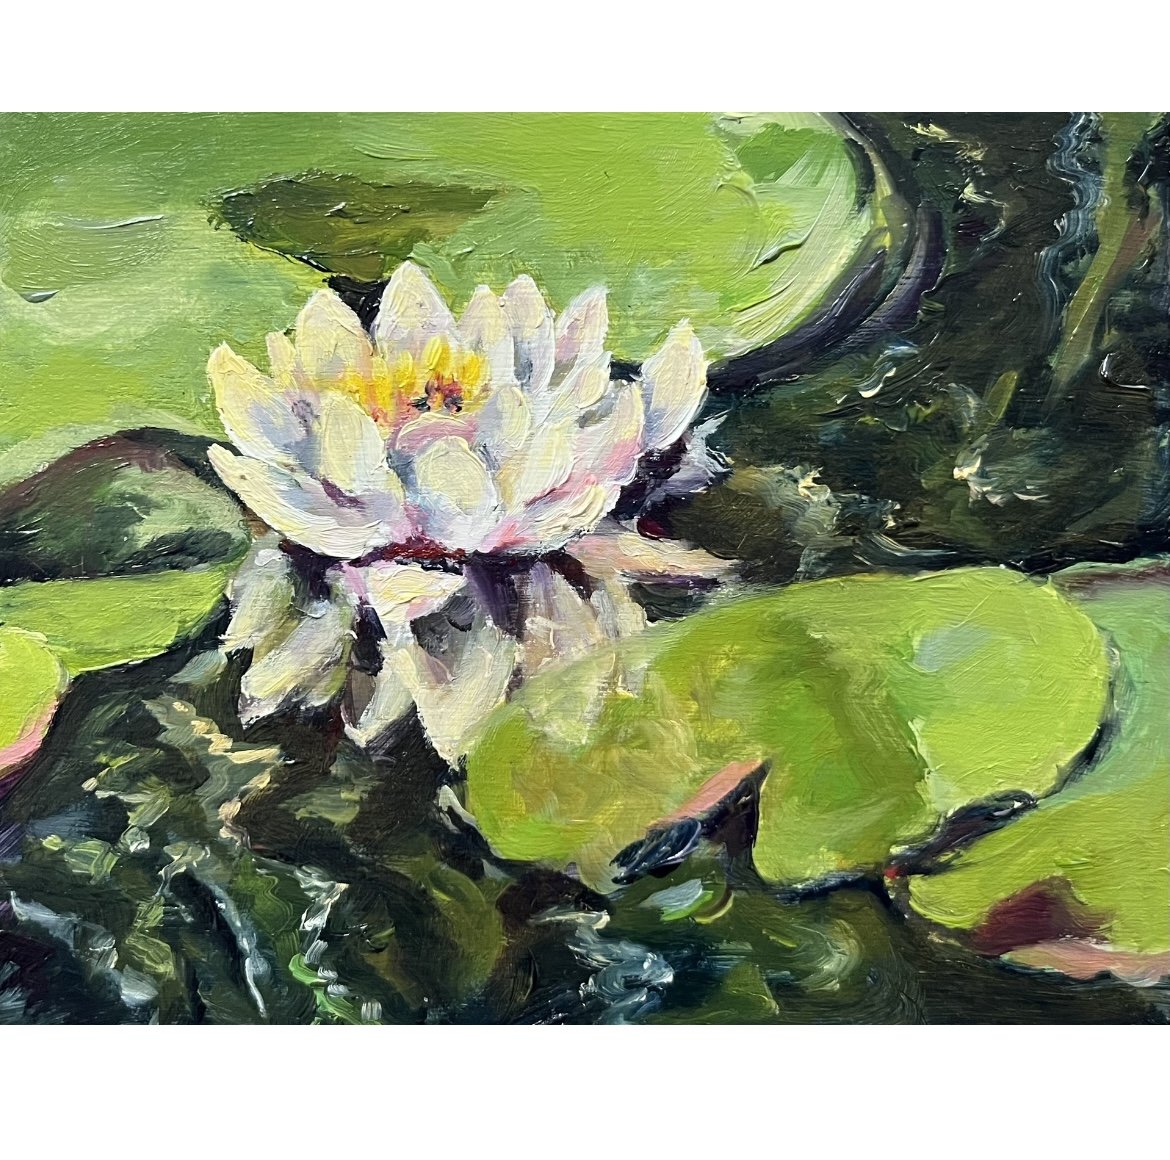 White Water Lily - 4"x5" - SOLD